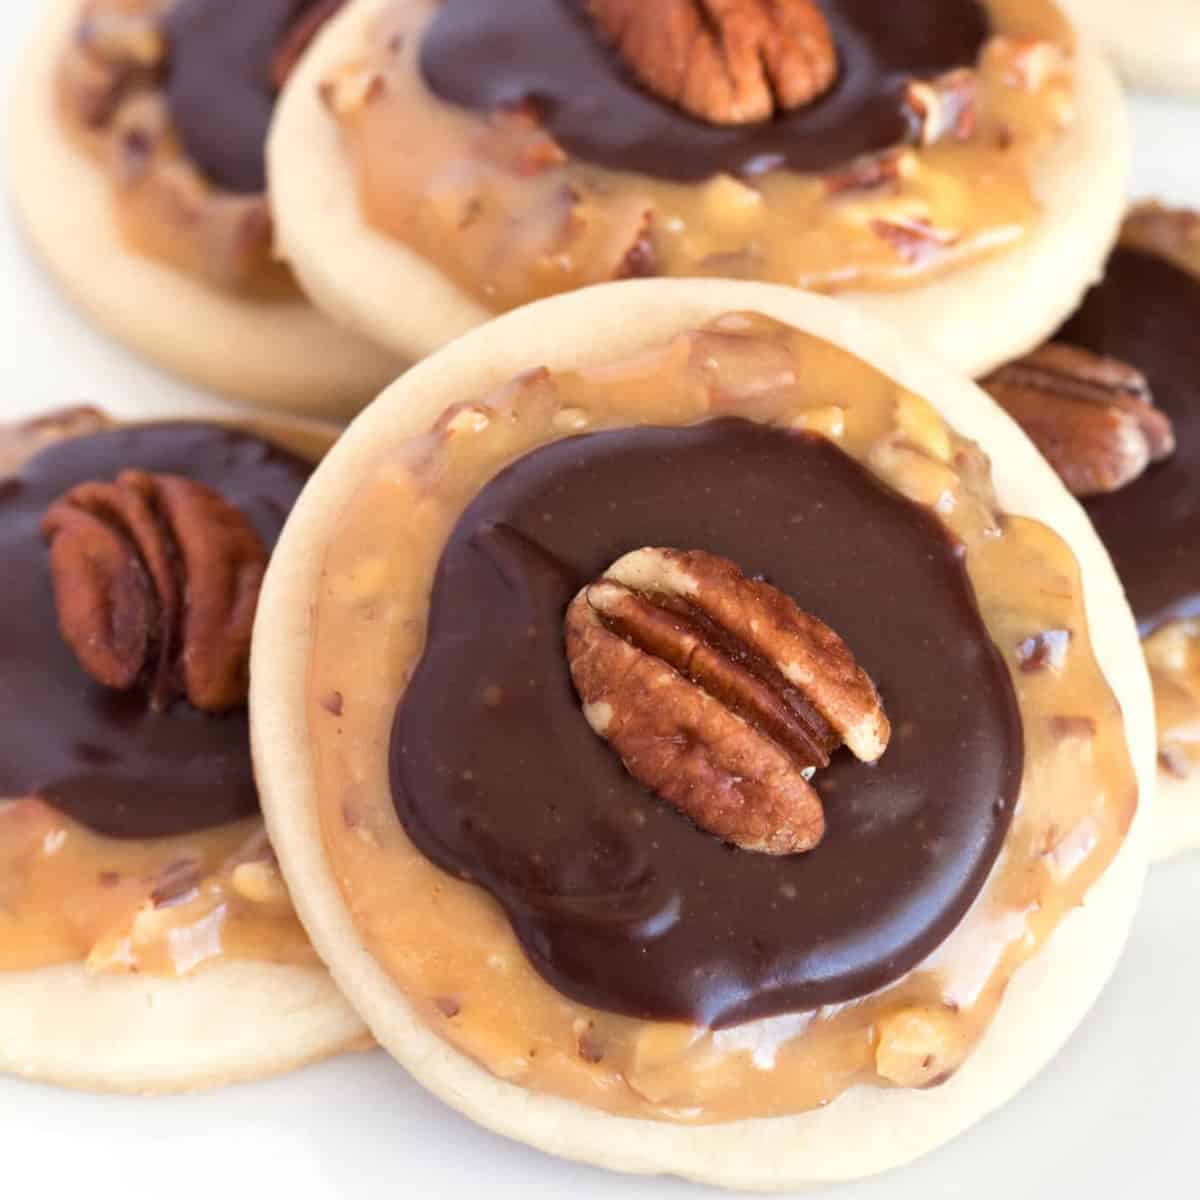 A group of round cookies with chocolate and pecans.